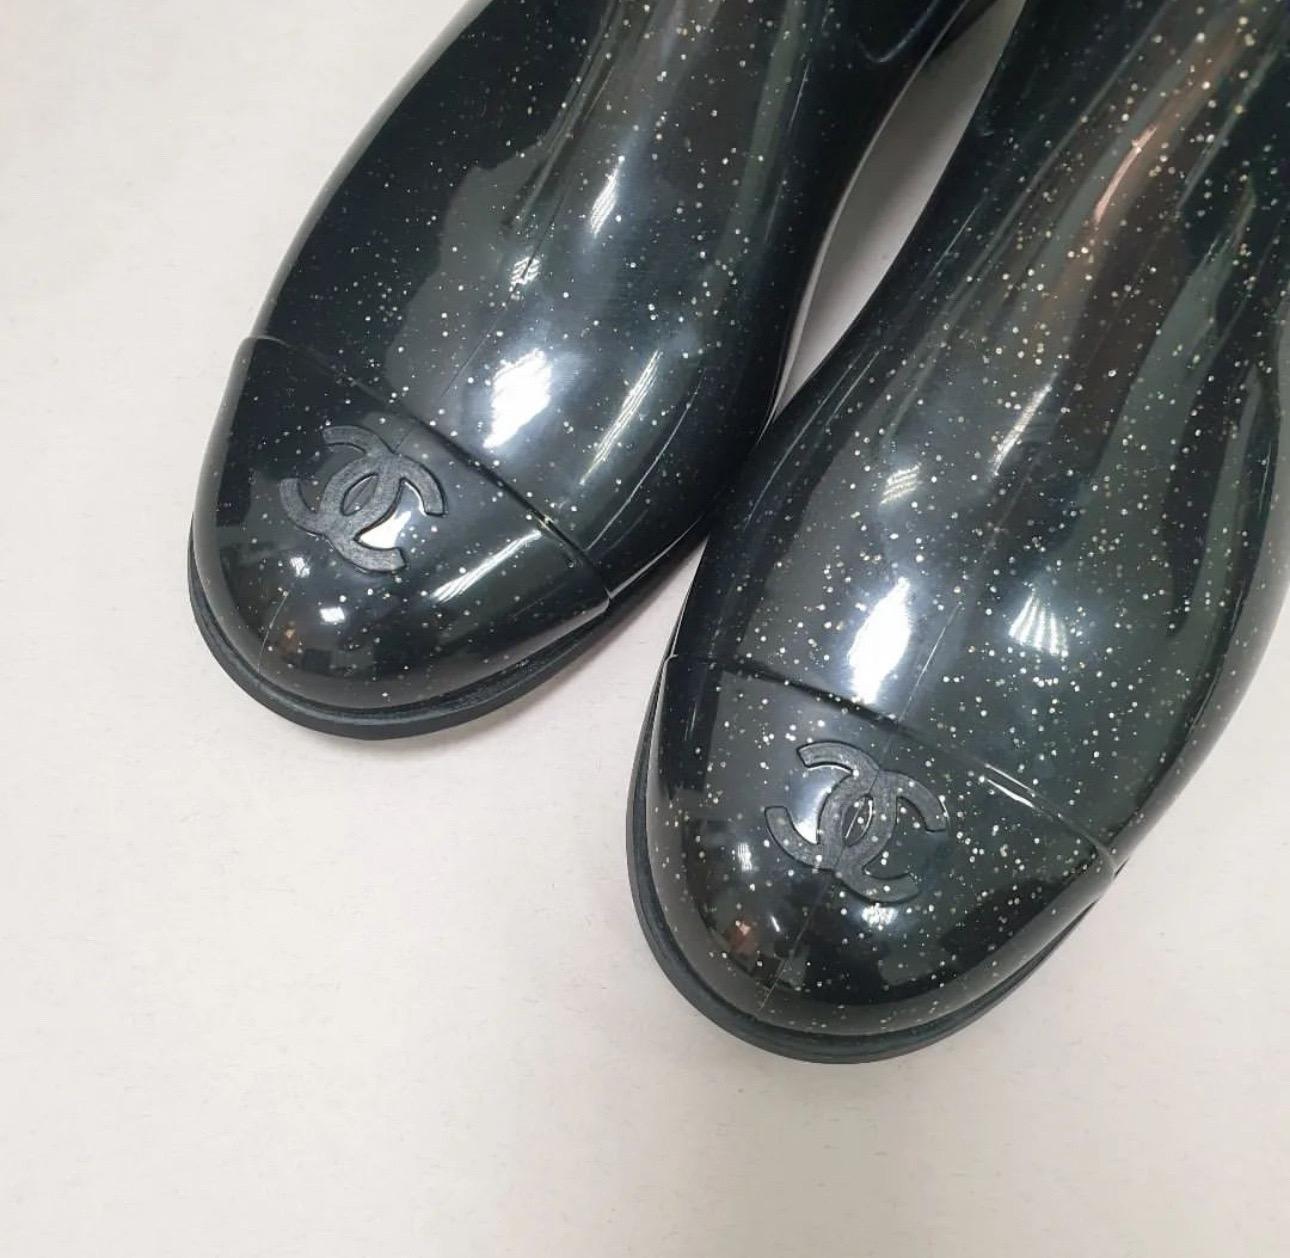 The boots are performed in high gloss rubber with glitter

Camellia flower with silver CC logo detailing

CC logo on the toe

Comfortable 1 3/4 inches heel

Removable insole leather insole

Sz.39

Never worn but have slight screches seen on pic.
No